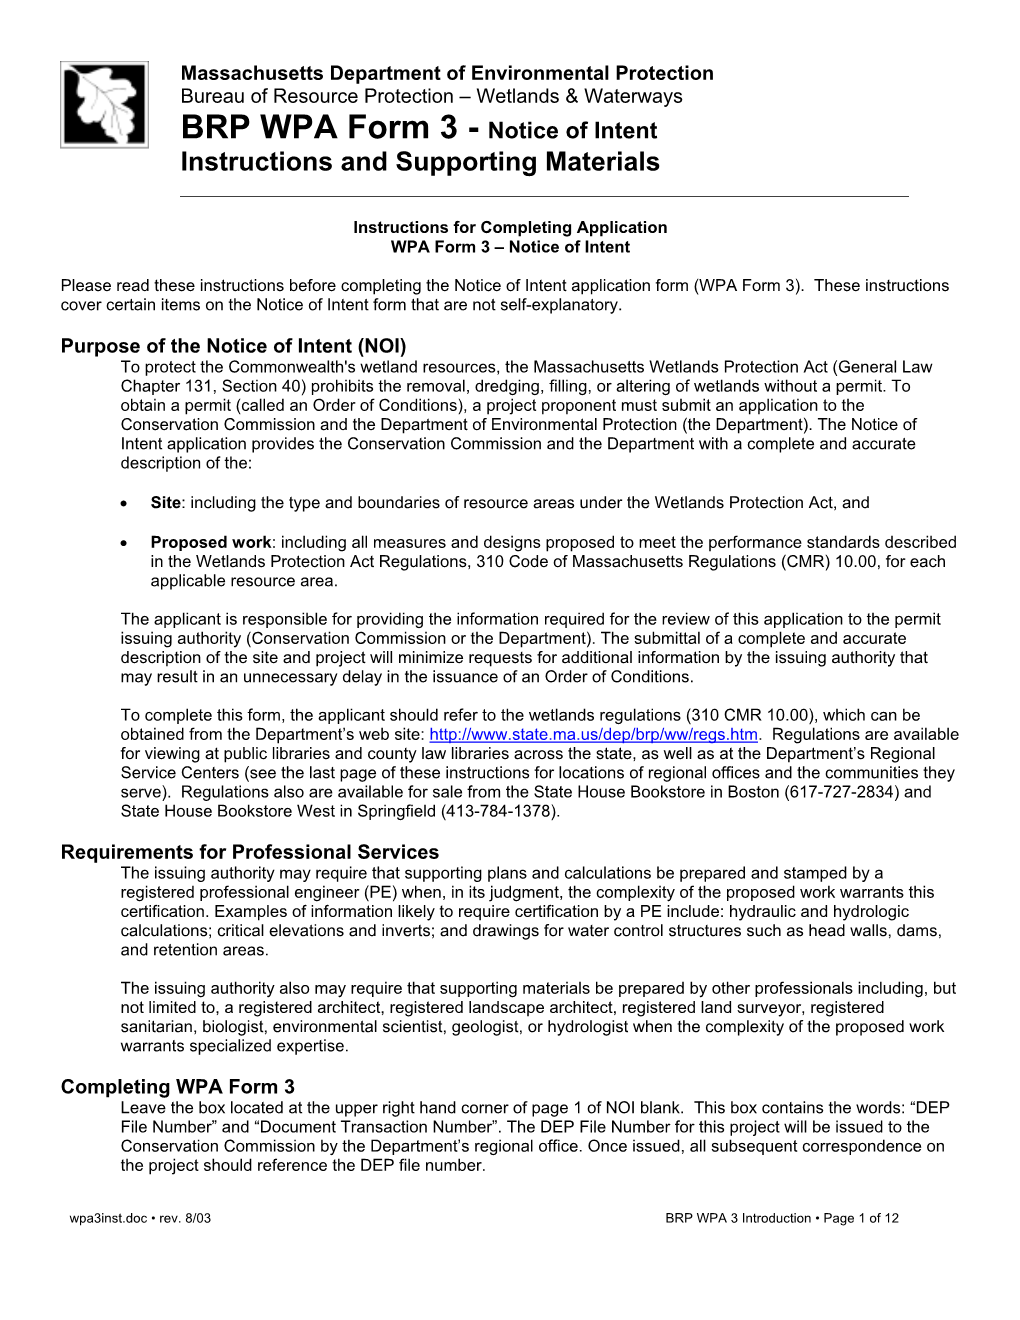 BRP WPA Form 3 - Instructions and Supporting Materials